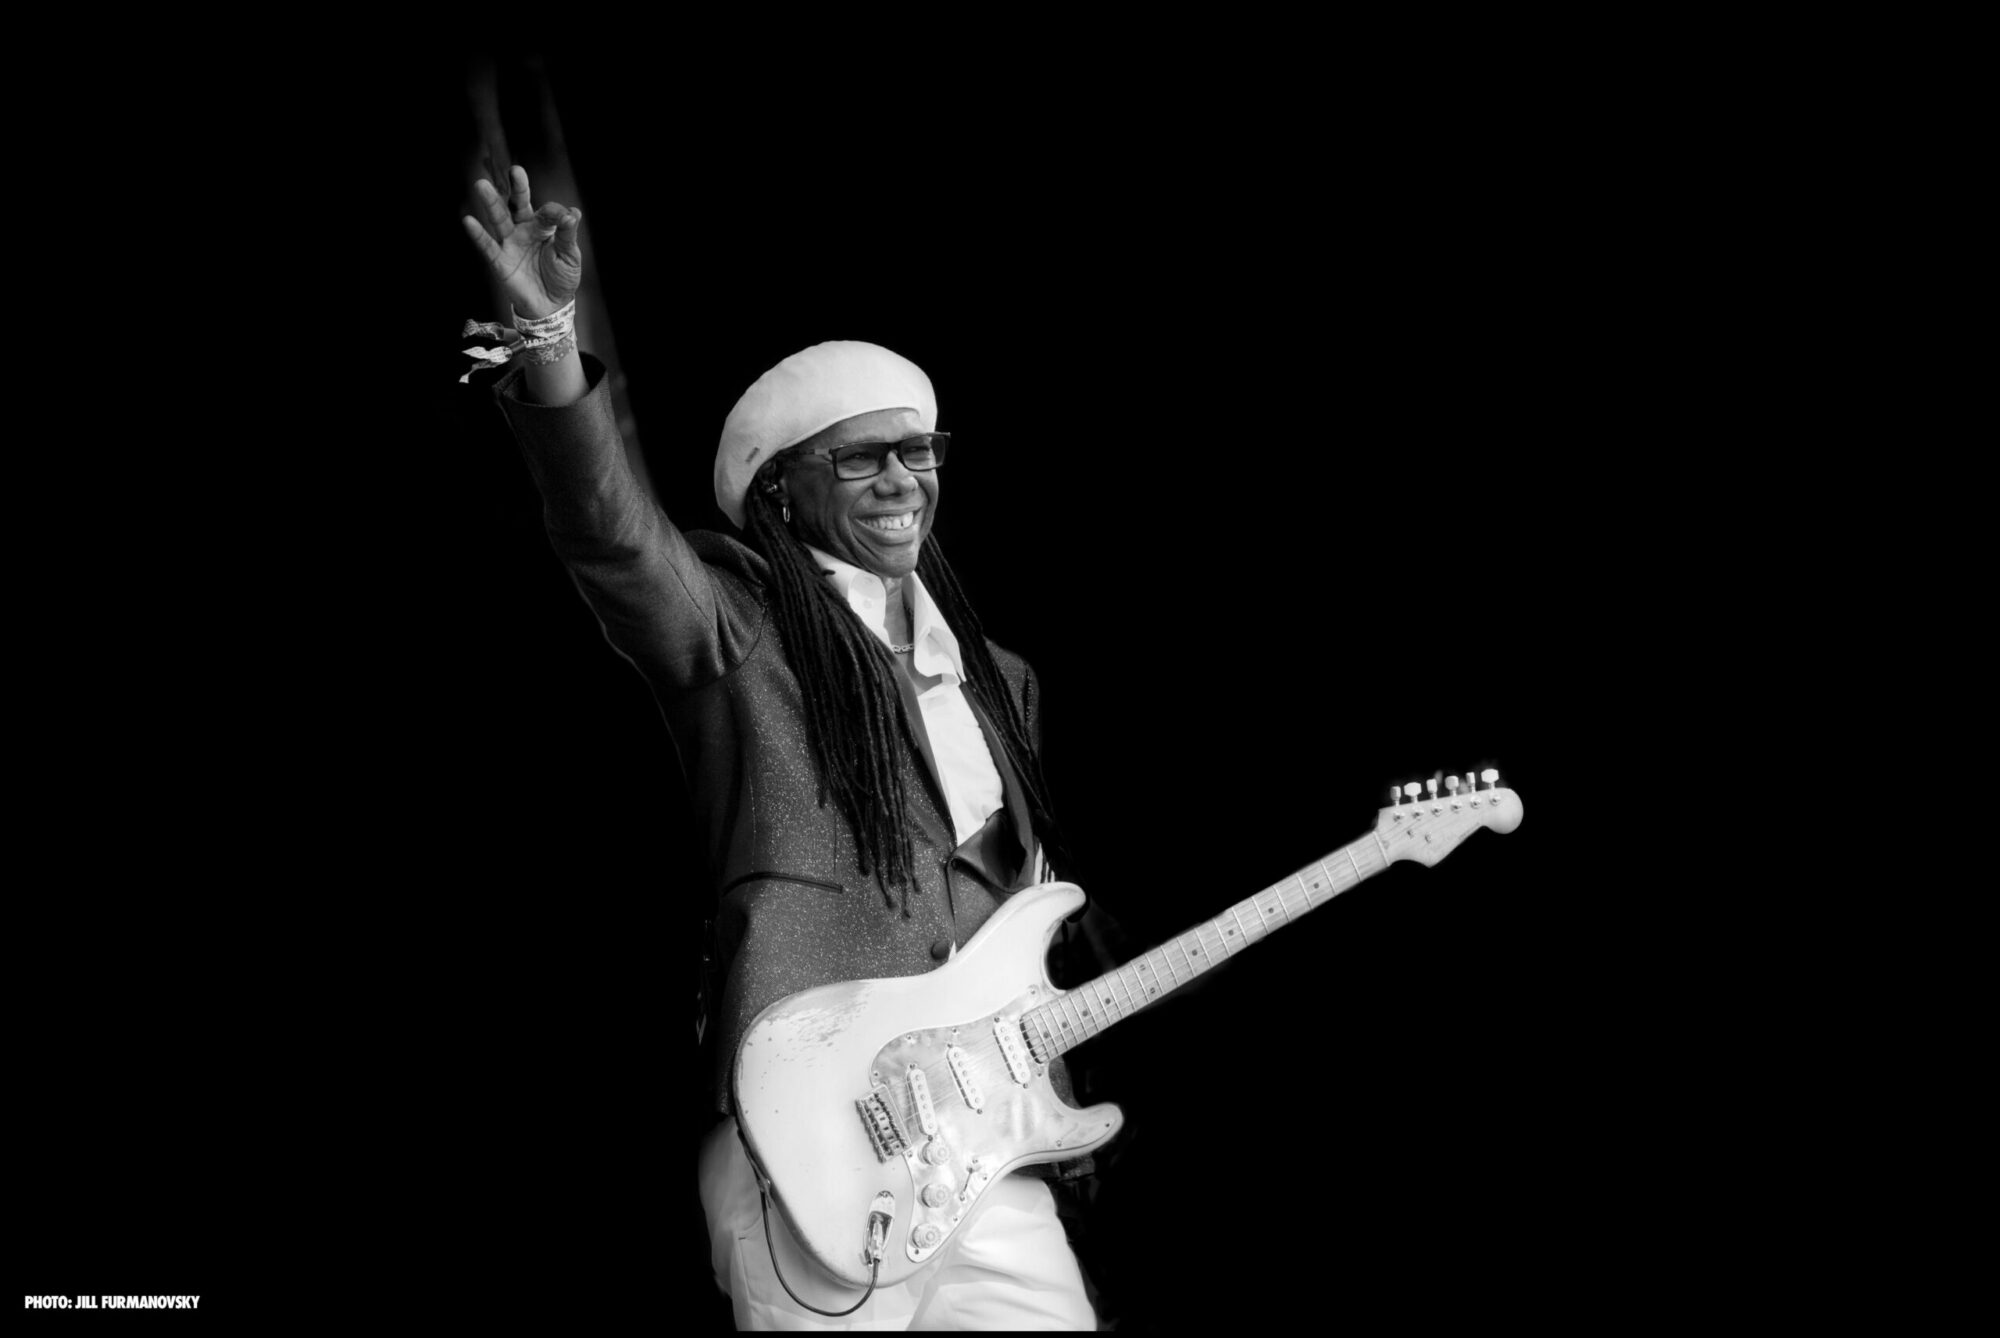 Image name Nile Rodgers and CHIC Official Ticket and Hotel Packages at Dalby Forest Yorkshire scaled the 23 image from the post Nile Rodgers and CHIC - Official Ticket and Hotel Packages at The Piece Hall, Halifax in Yorkshire.com.